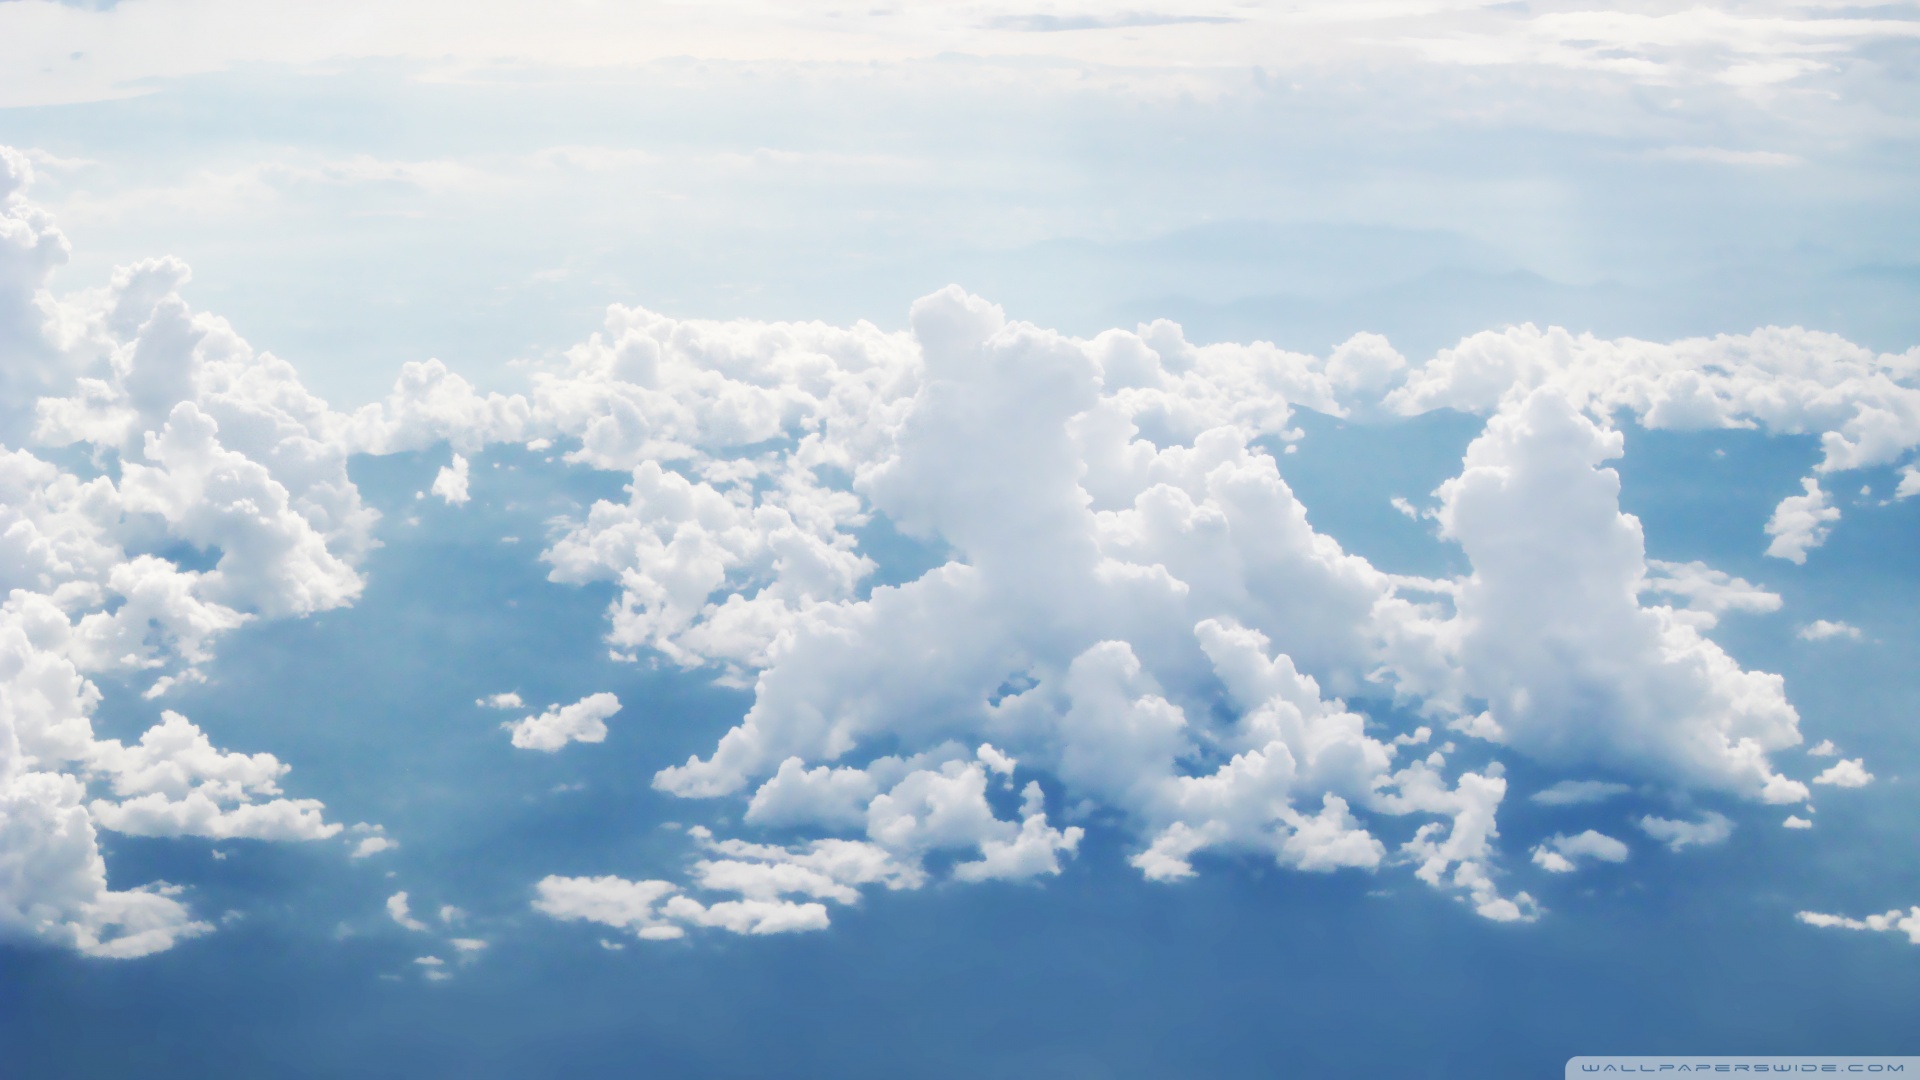  Aerial Photography Wallpaper 1920x1080 Sky And Clouds Aerial